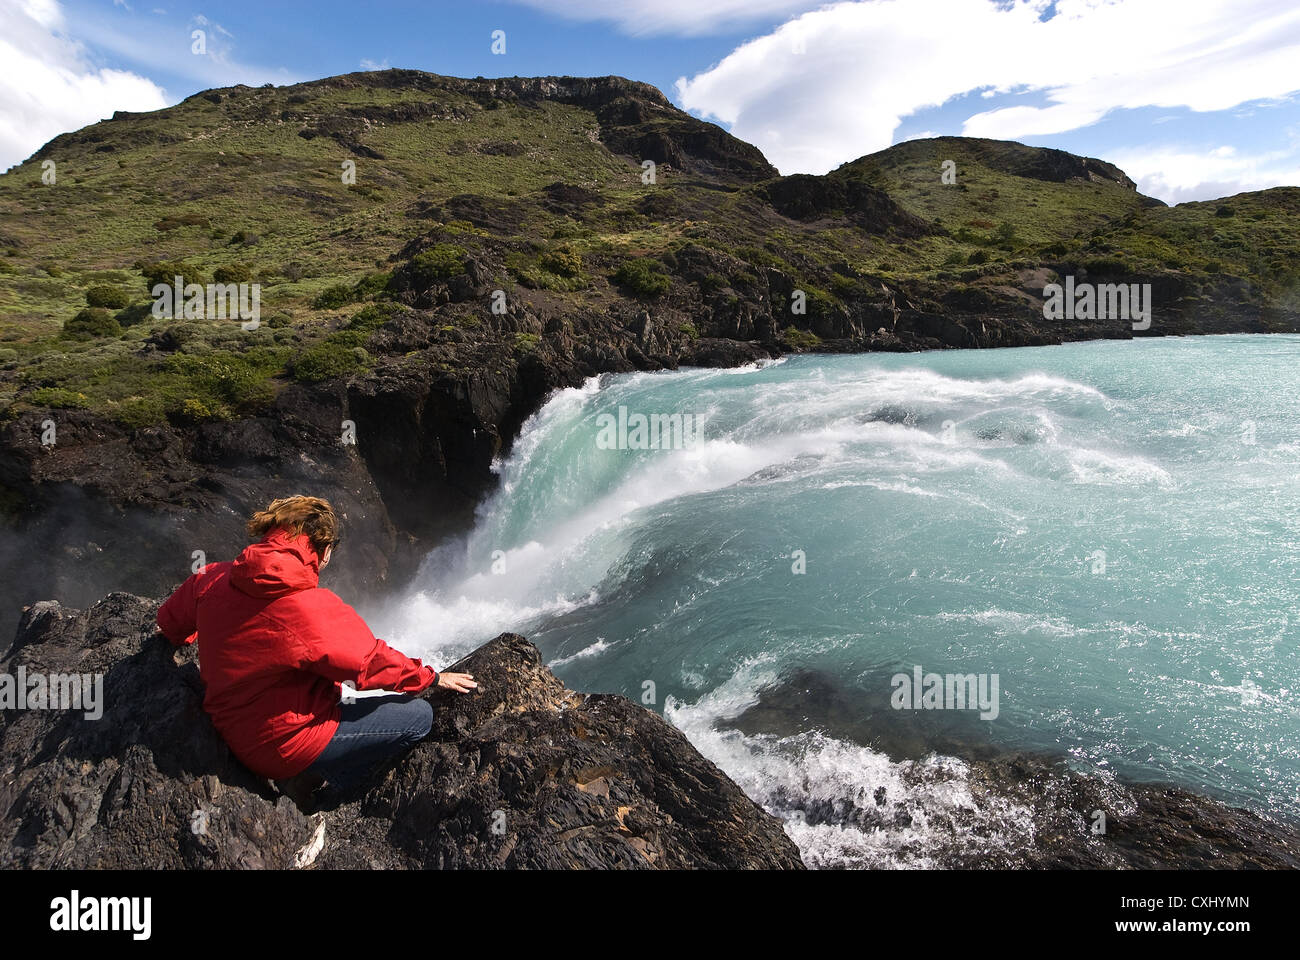 Elk198-4459 Chile, Patagonia, Torres del Paine NP, Salto Grande waterfall with visitor, Andes, model released Stock Photo